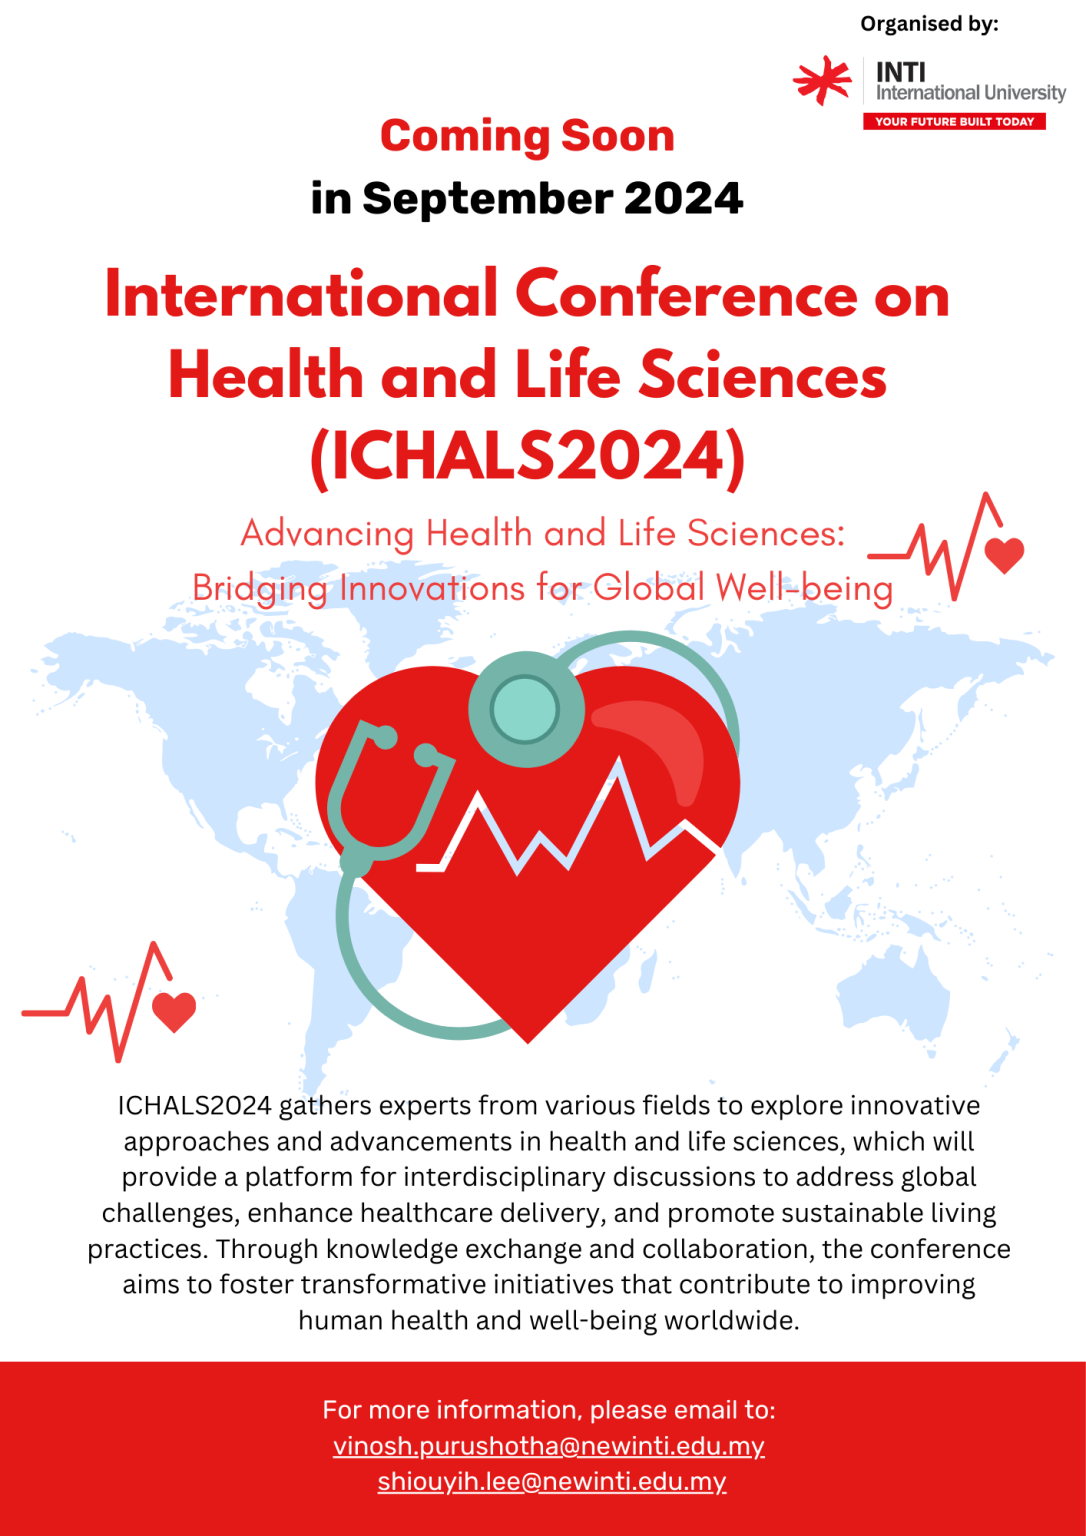 International Conference on Health and Life Sciences 2024